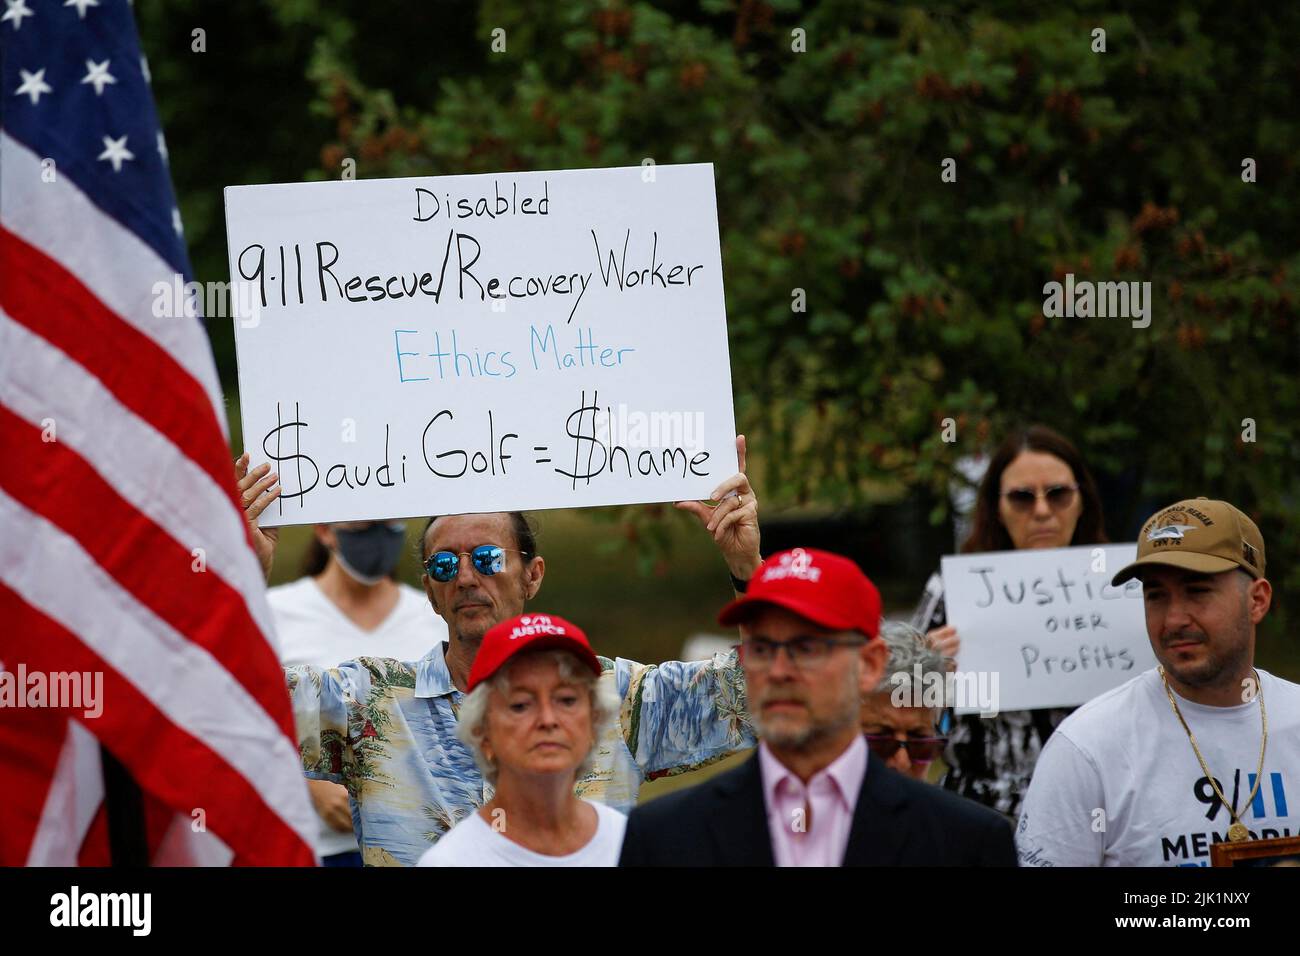 Family members and survivors from the organization 9/11 Justice protest against the Saudi Arabian-funded golf series and its tournament being held at the Trump National Golf Club in Bedminster, New Jersey, U.S., July 29, 2022. REUTERS/Eduardo Munoz Stock Photo